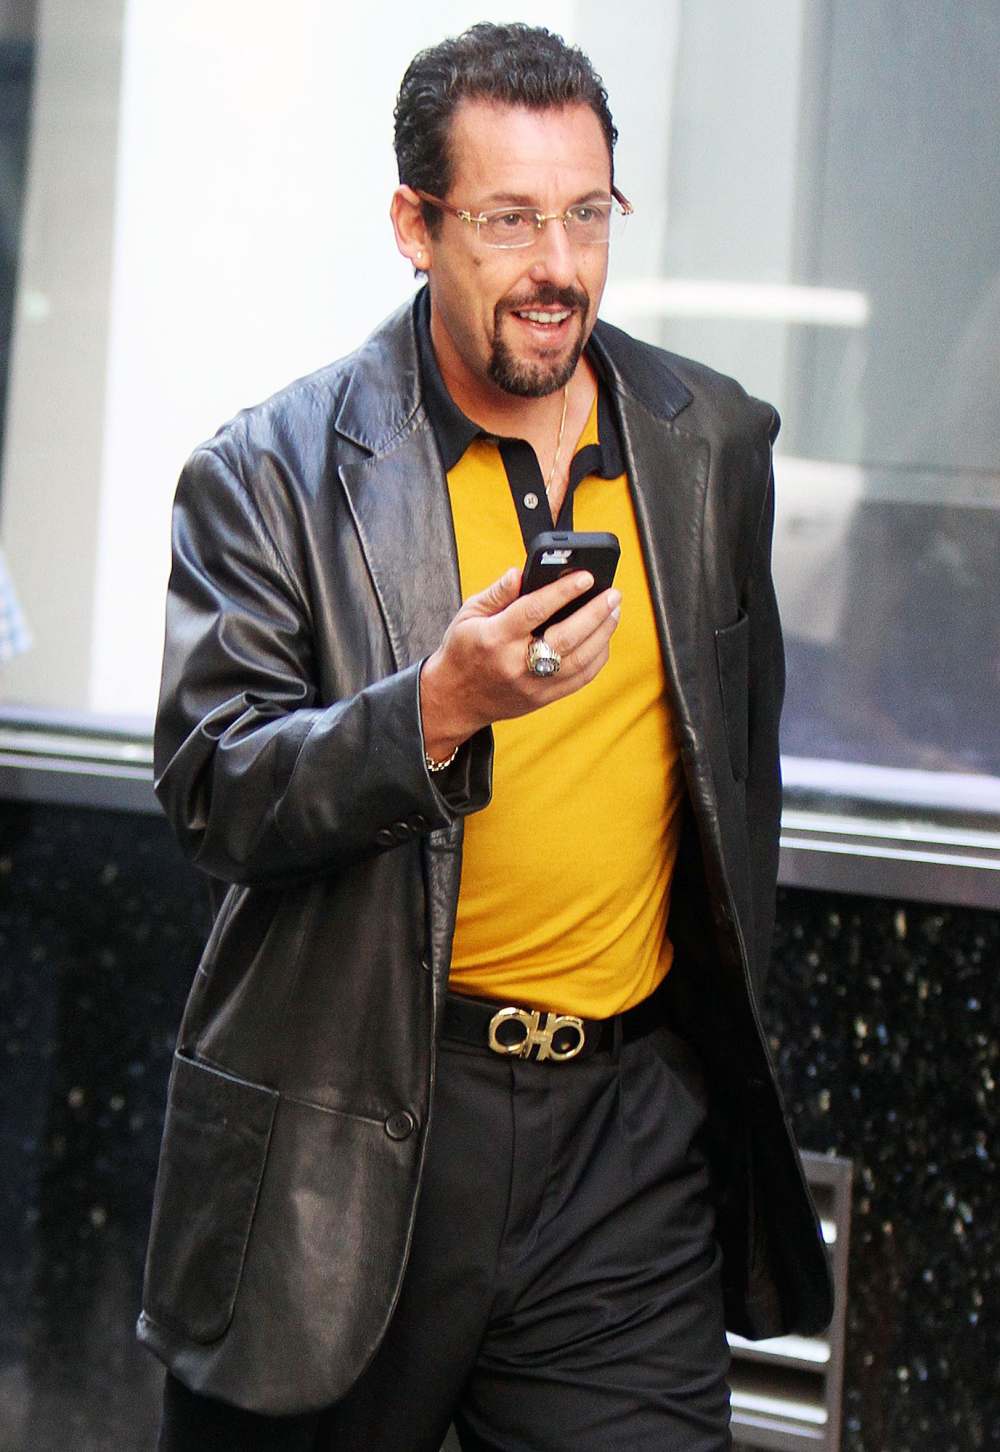 Adam Sandler Filming Uncut Gems Adam Sandler Cant Let His Daughters Watch Uncut Gems Because They Would Be Disappointed